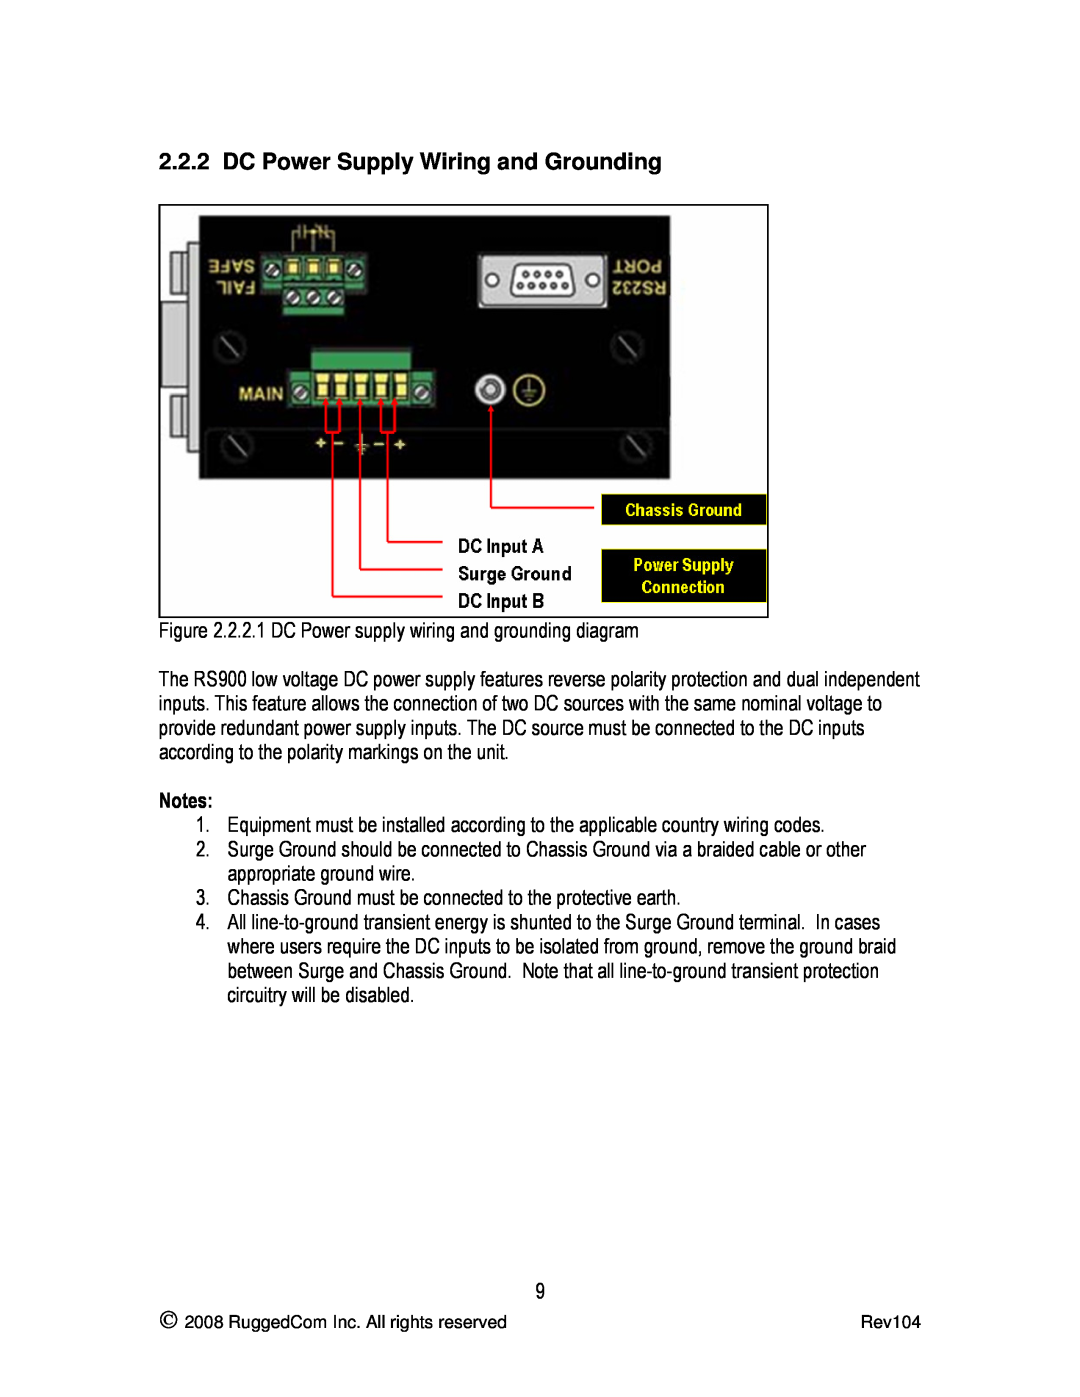 RuggedCom RS900G manual DC Power Supply Wiring and Grounding 